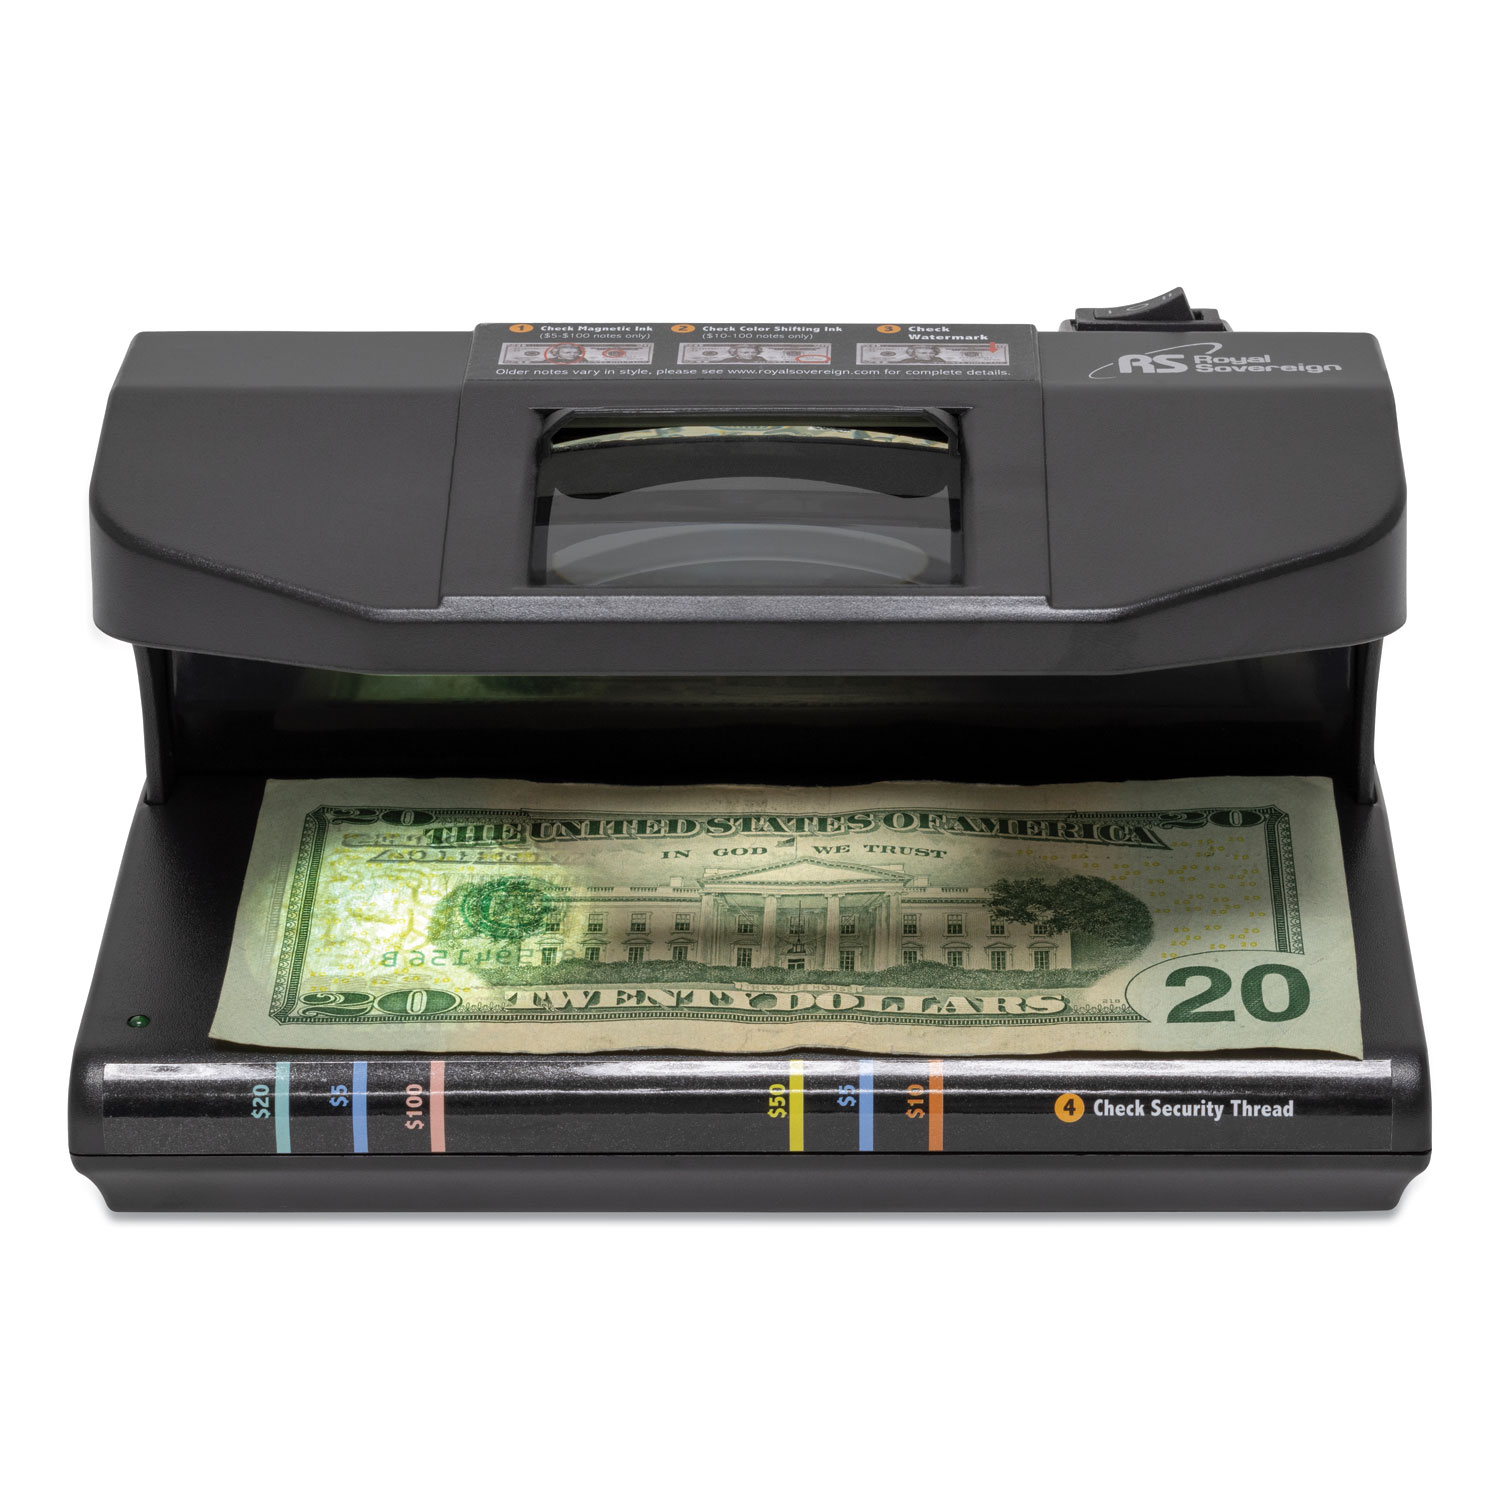  Royal Sovereign RCD-3000 Four-Way Counterfeit Detector, UV, Fluorescent, Magnetic, Magnifier (RSIRCD3000) 